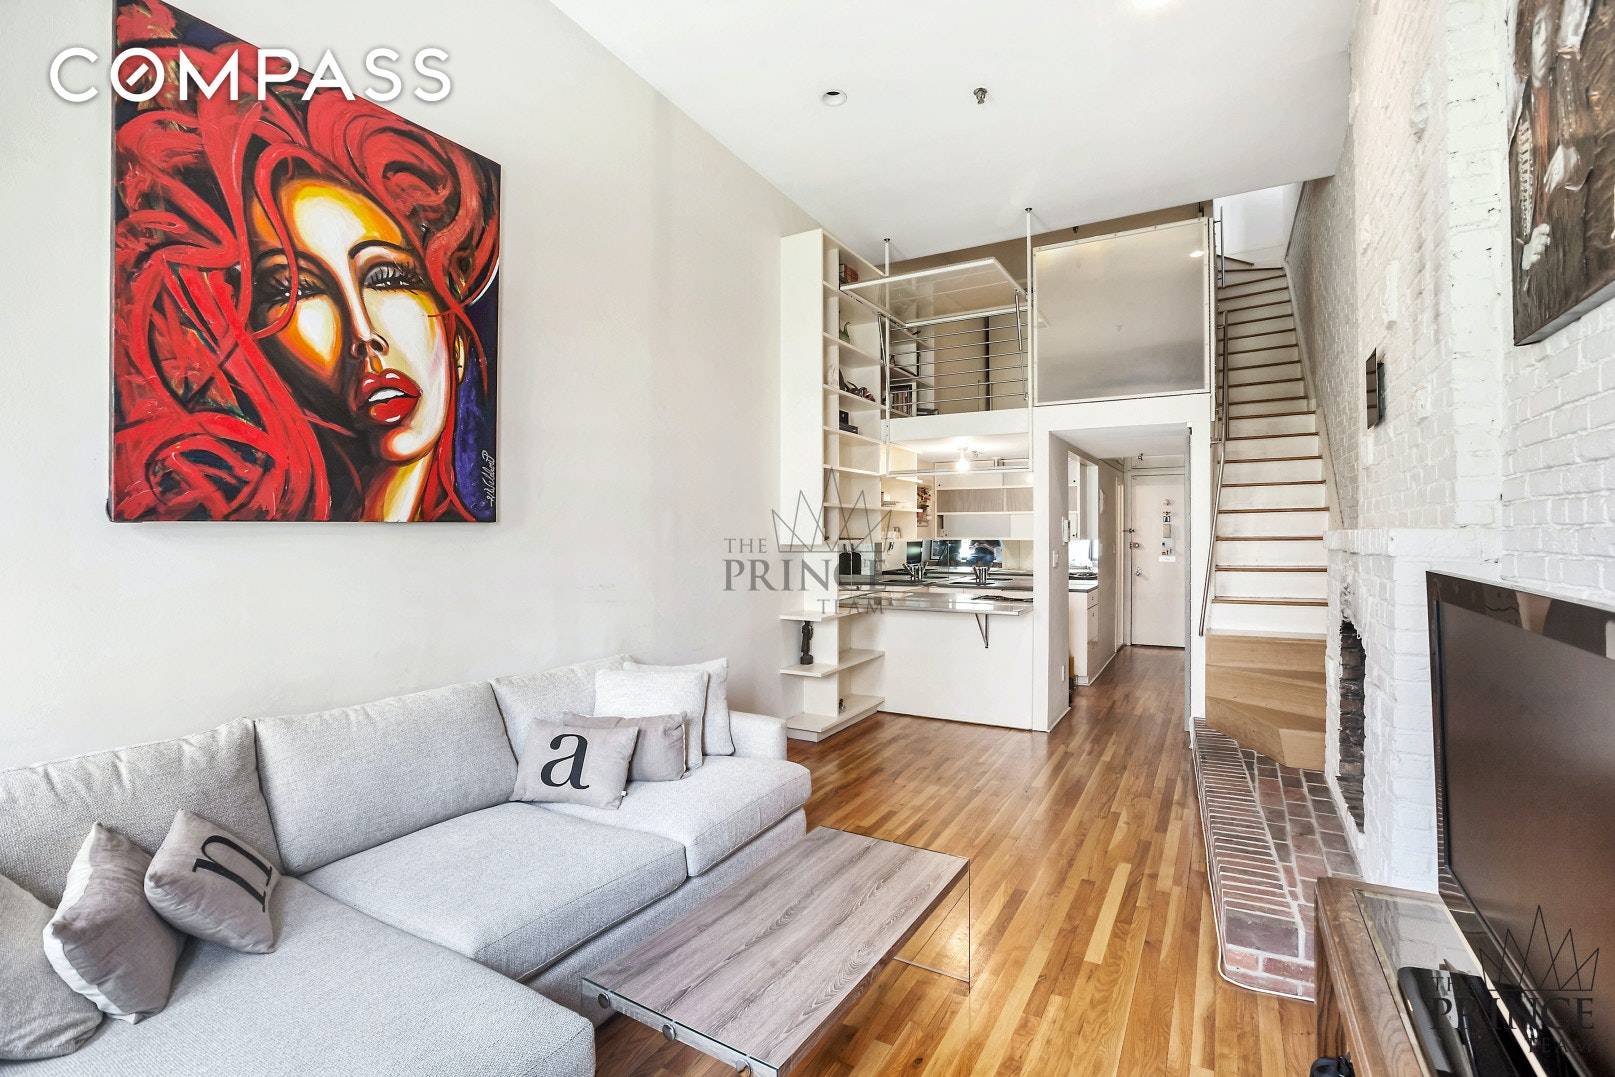 Enjoy life in one of the city's most vibrant neighborhoods in this stunning one bedroom, one and a half bathroom triplex with a stunning private roof deck in a historic ...